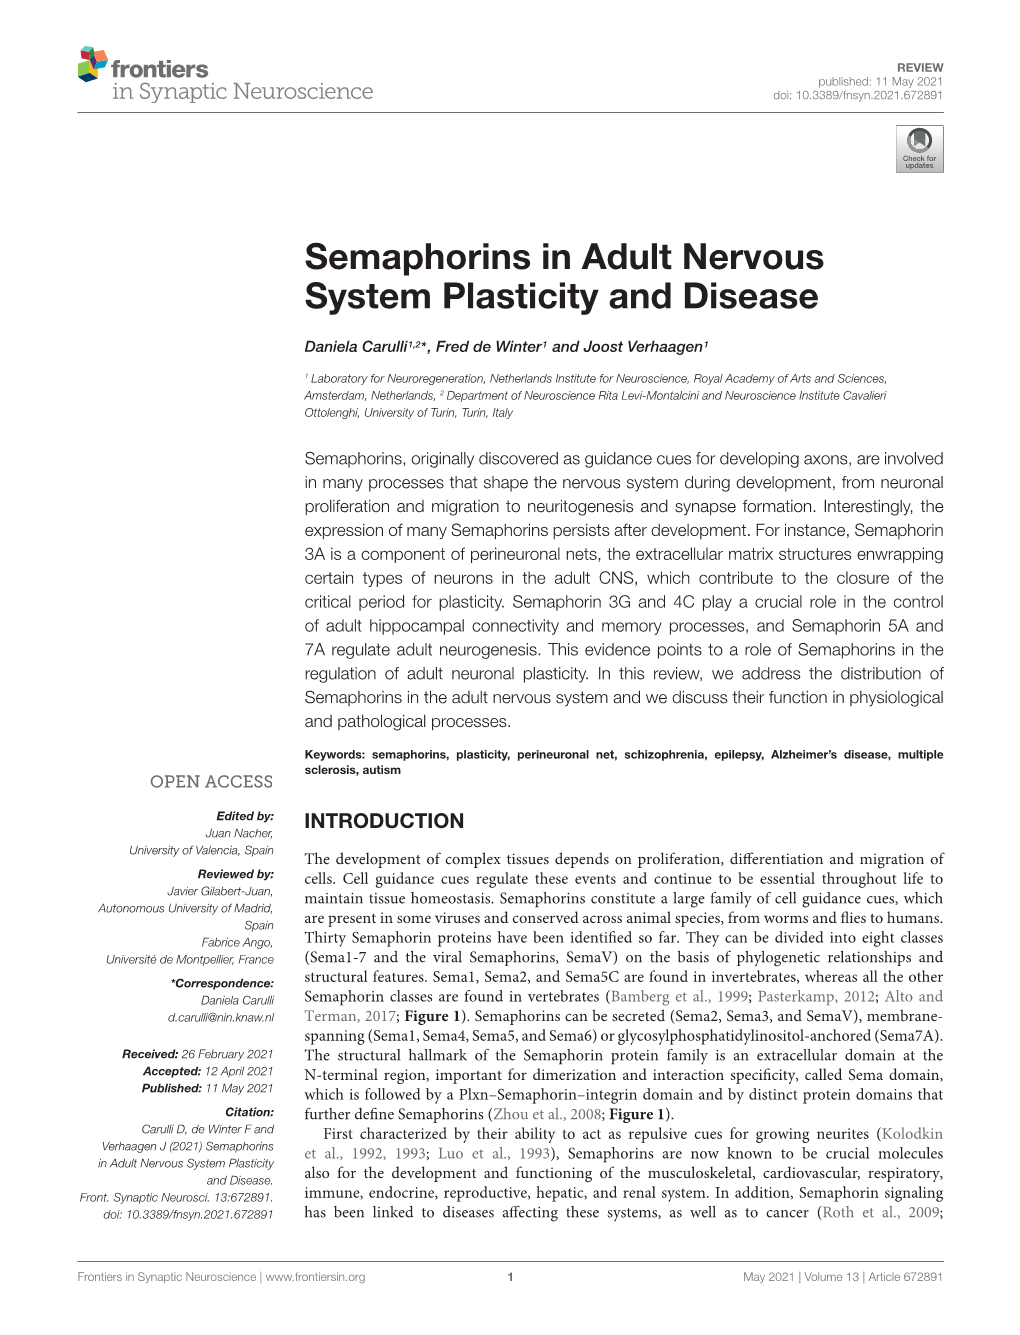 Semaphorins in Adult Nervous System Plasticity and Disease